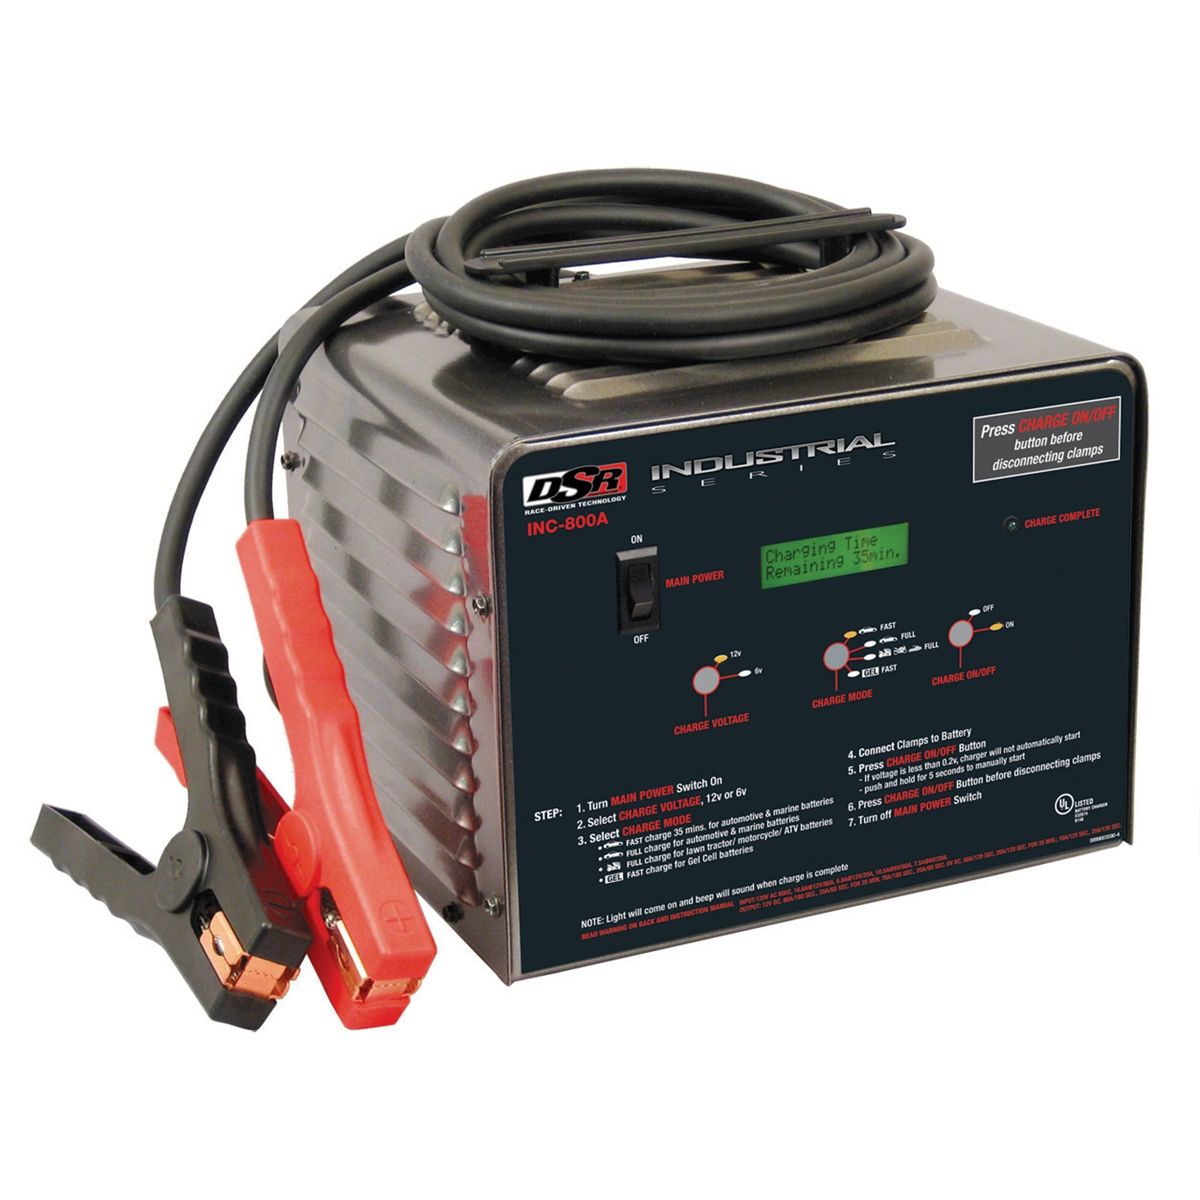 Microprocessor Controlled Bench Commercial Battery Charger ...